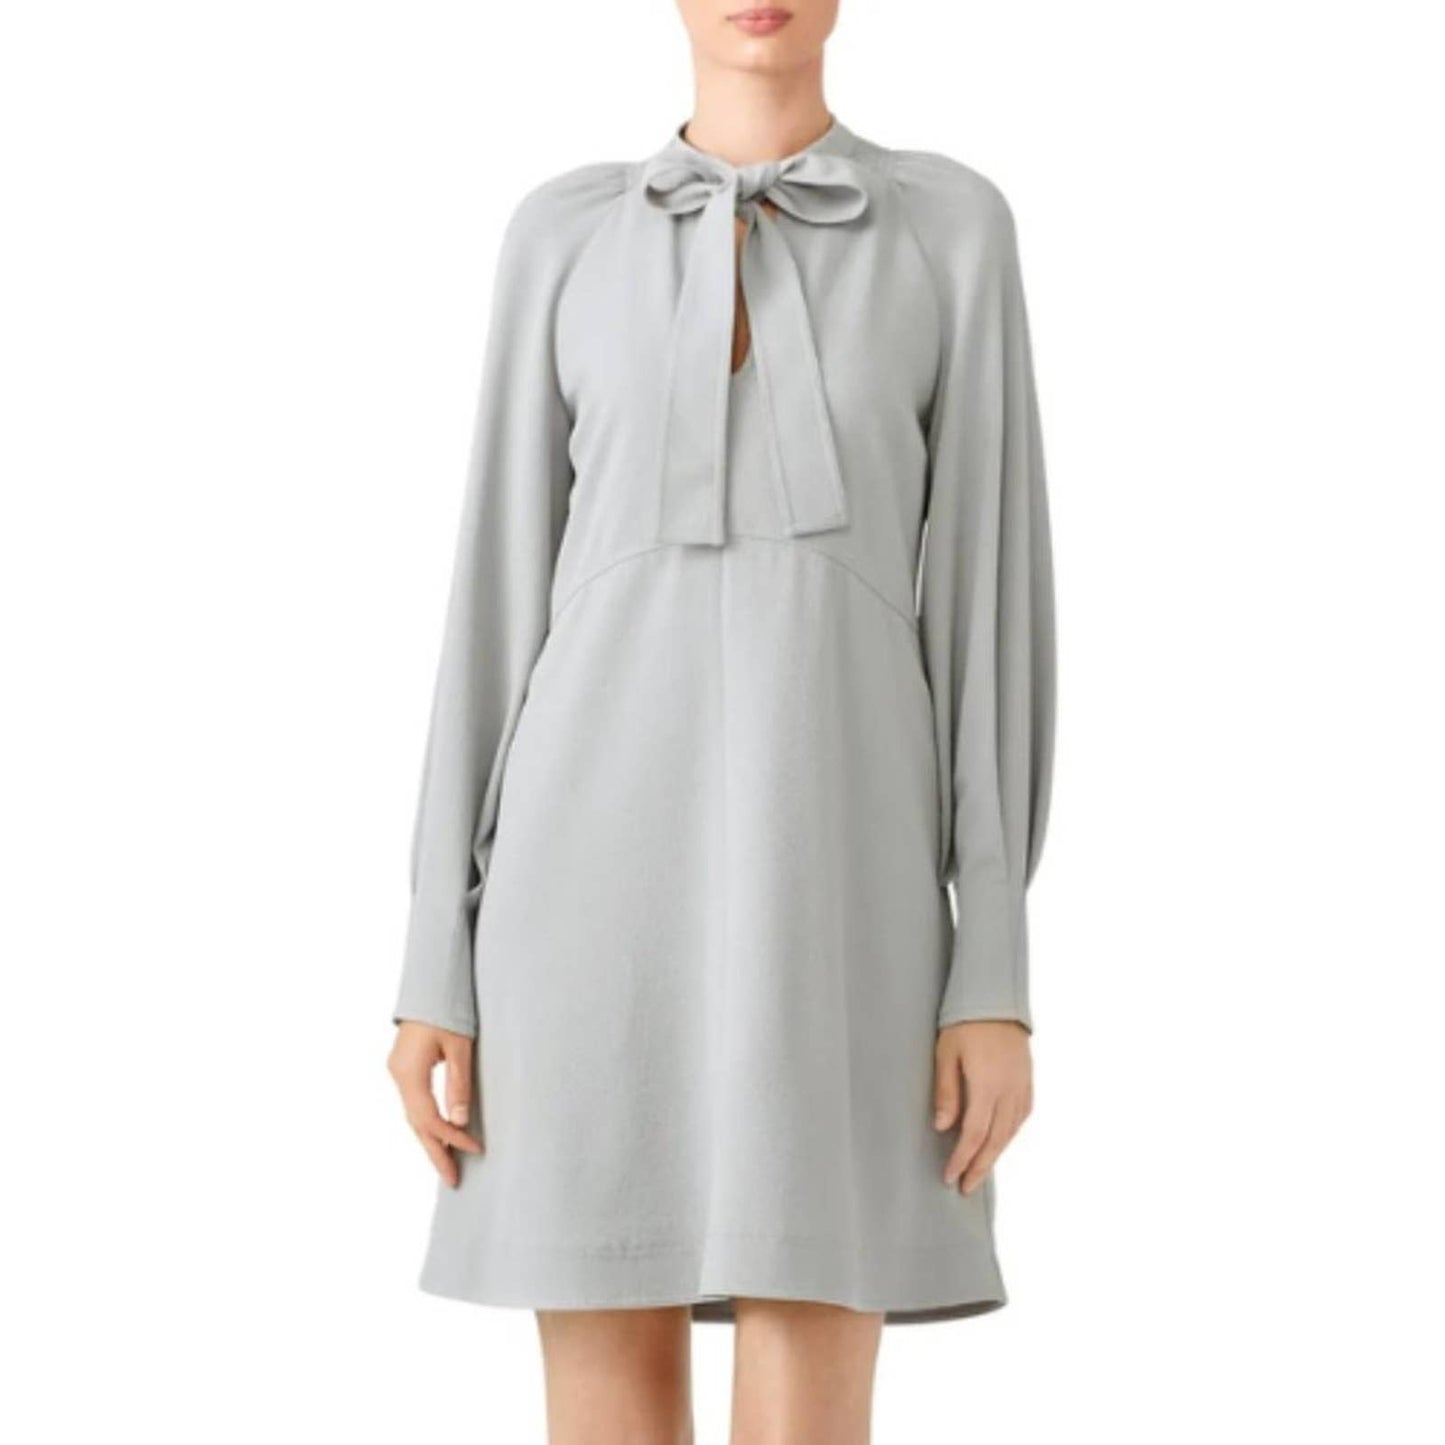 See by Chloe Airy Grey City Dress in Blue Gray Size 36 (6)